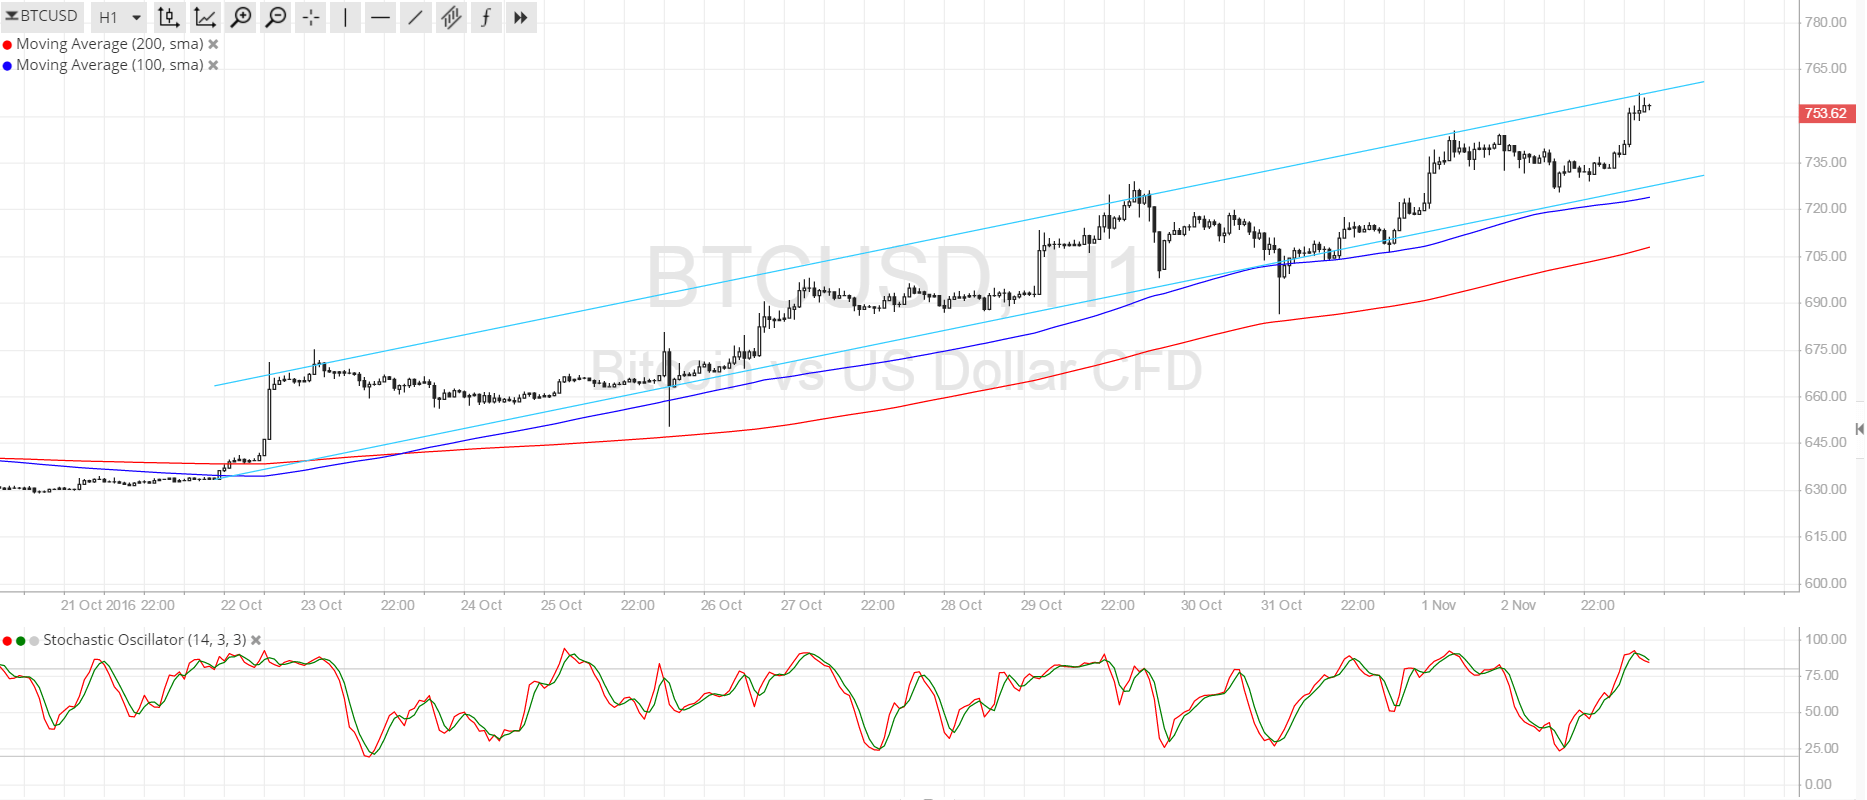 Bitcoin Price Technical Analysis for 11/03/2016 - Unstoppable Climb?